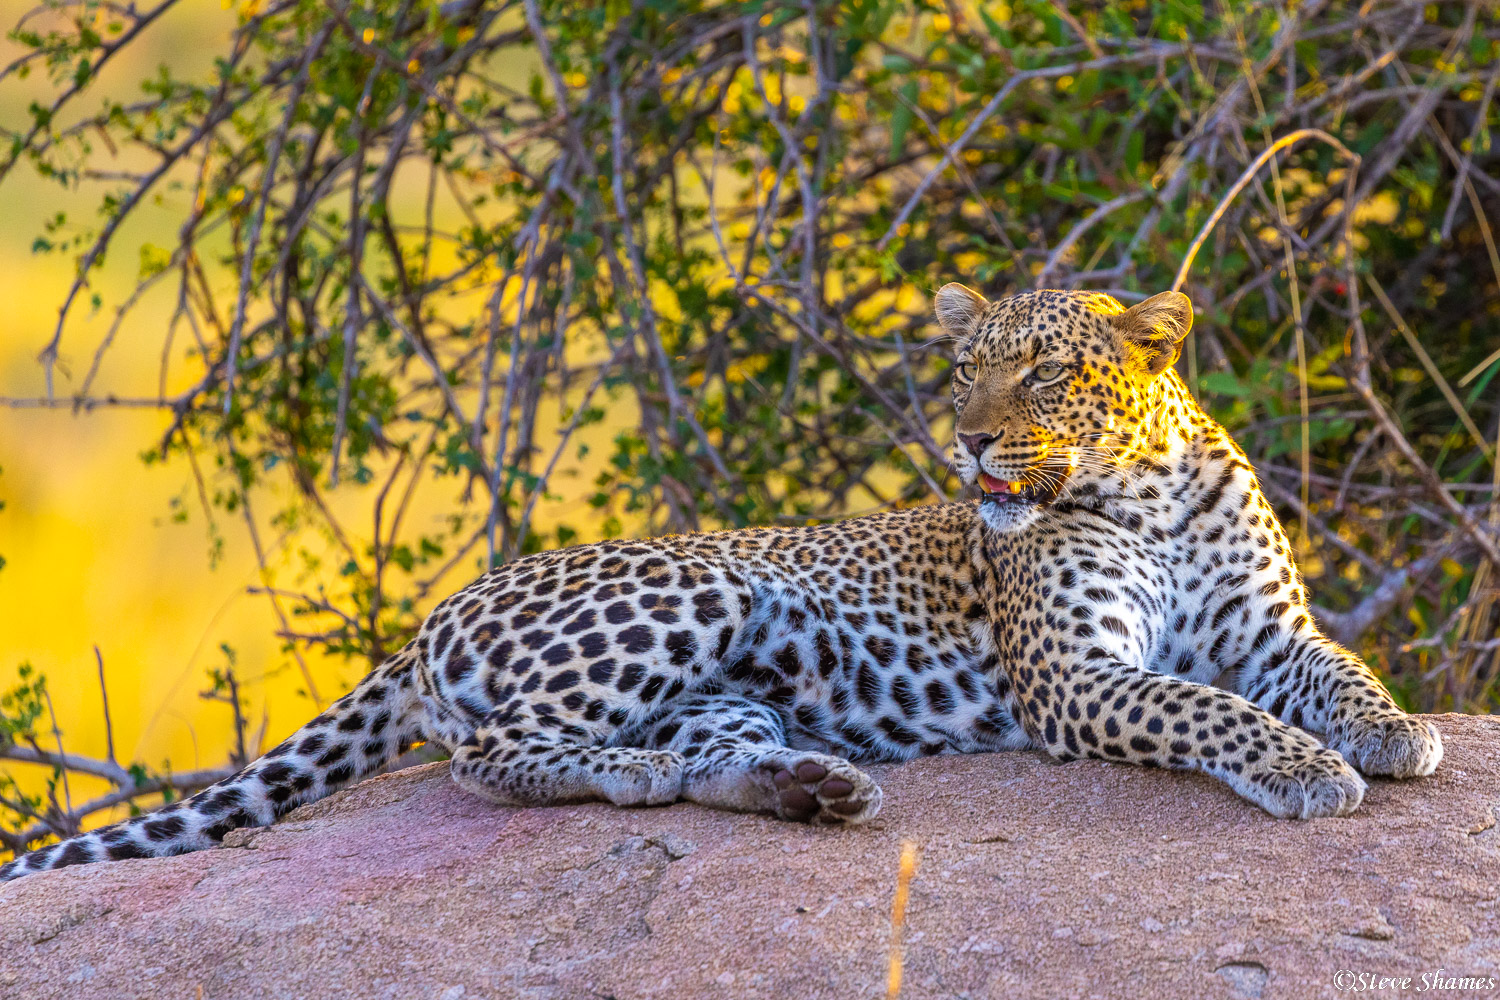 Leopard on a rock in the Serengeti.